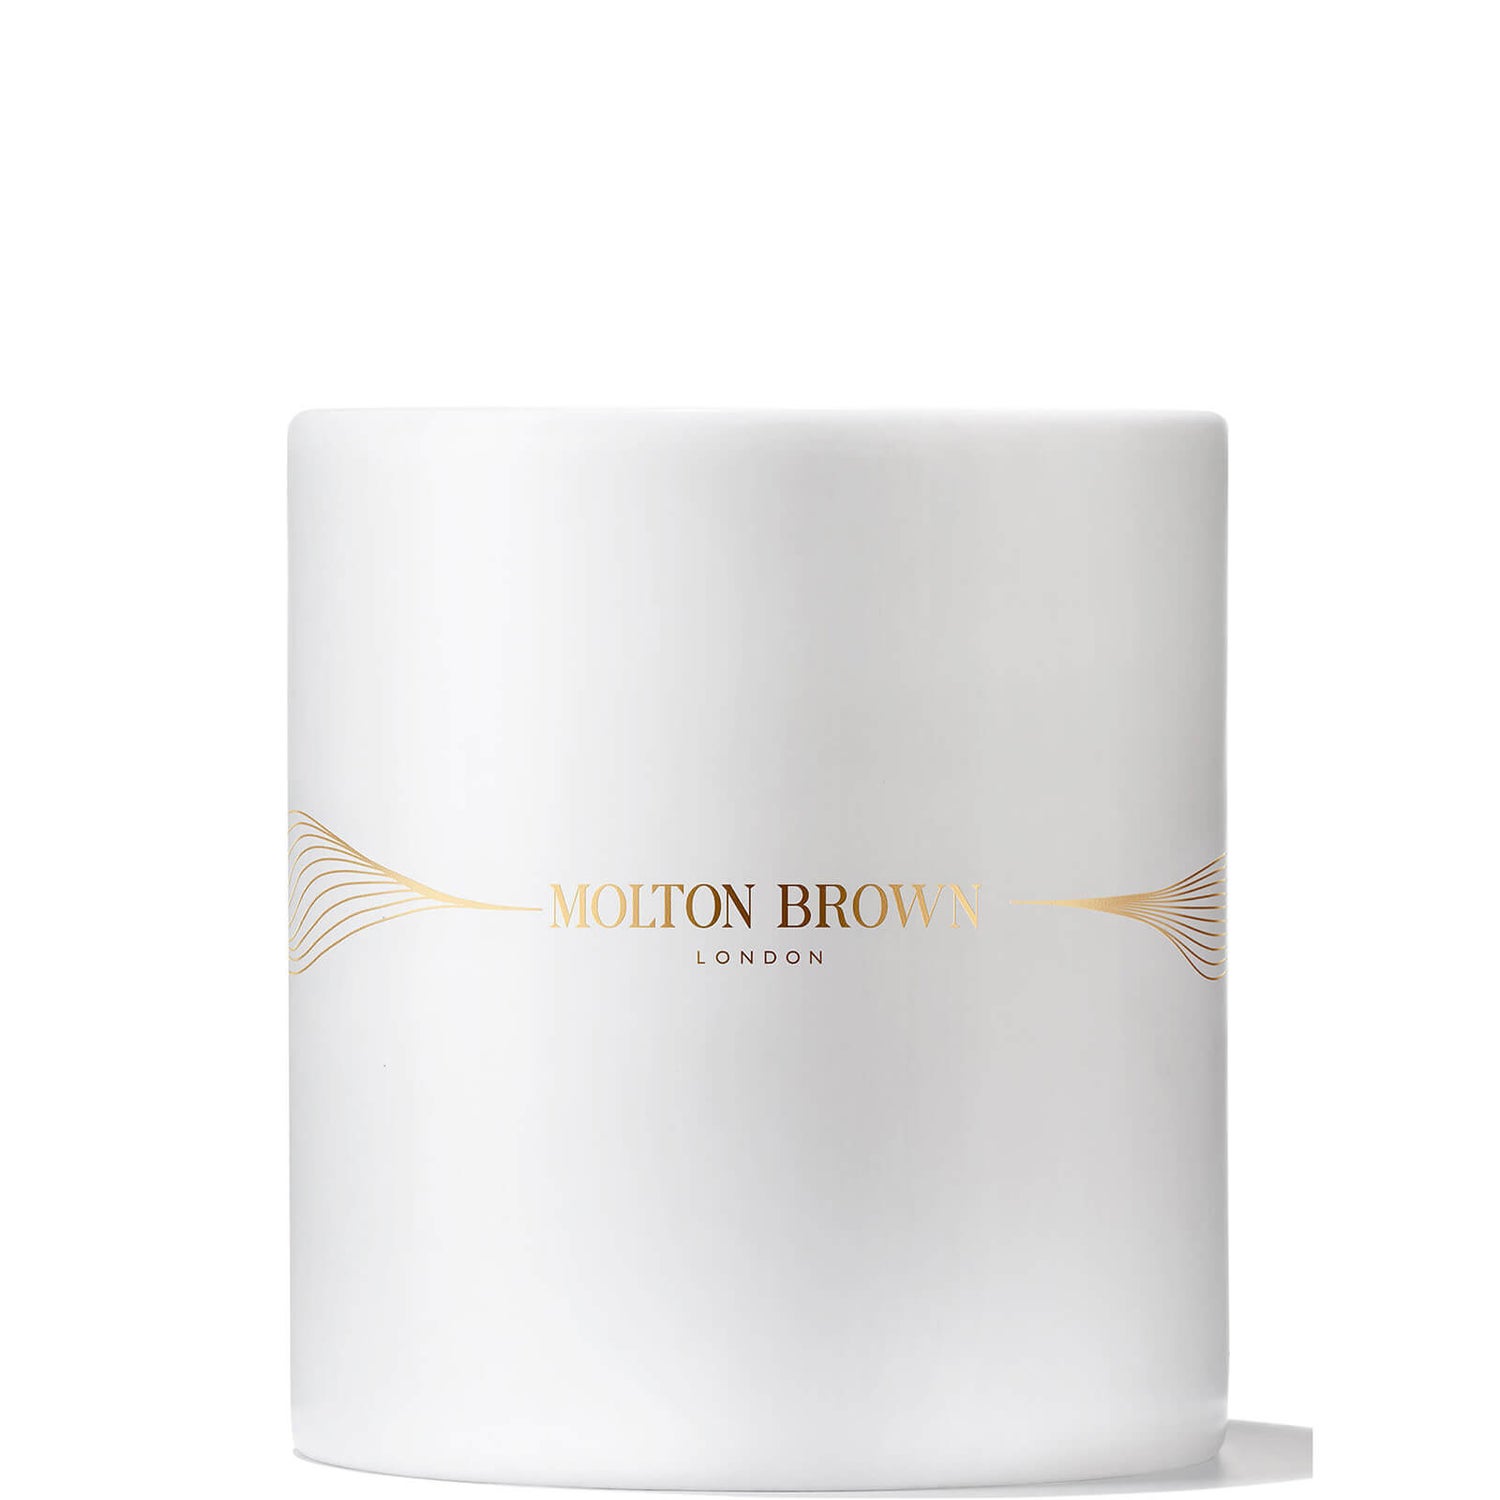 Molton Brown Milk Musk Single Wick Candle 180g